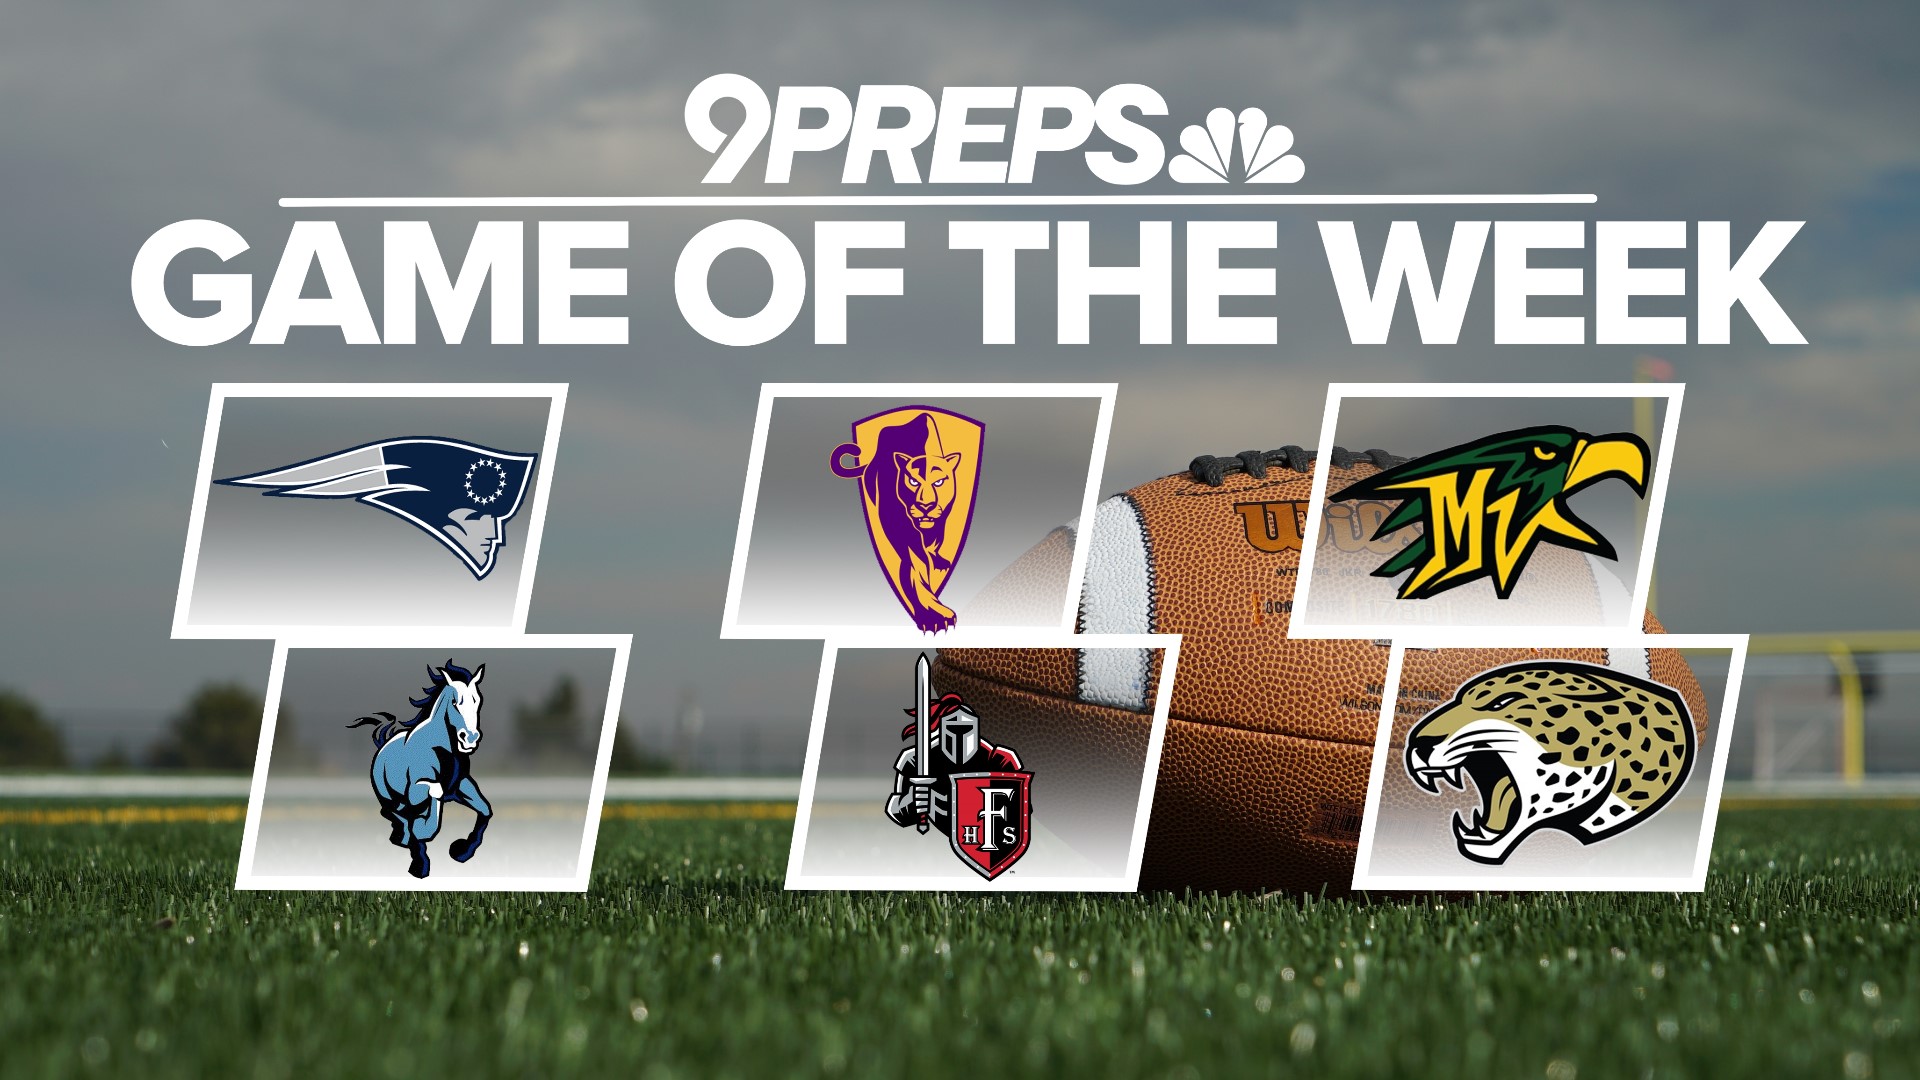 The 9Preps Game of the Week rolls on! Vote to determine which high school football game we showcase on Friday, Oct. 6.